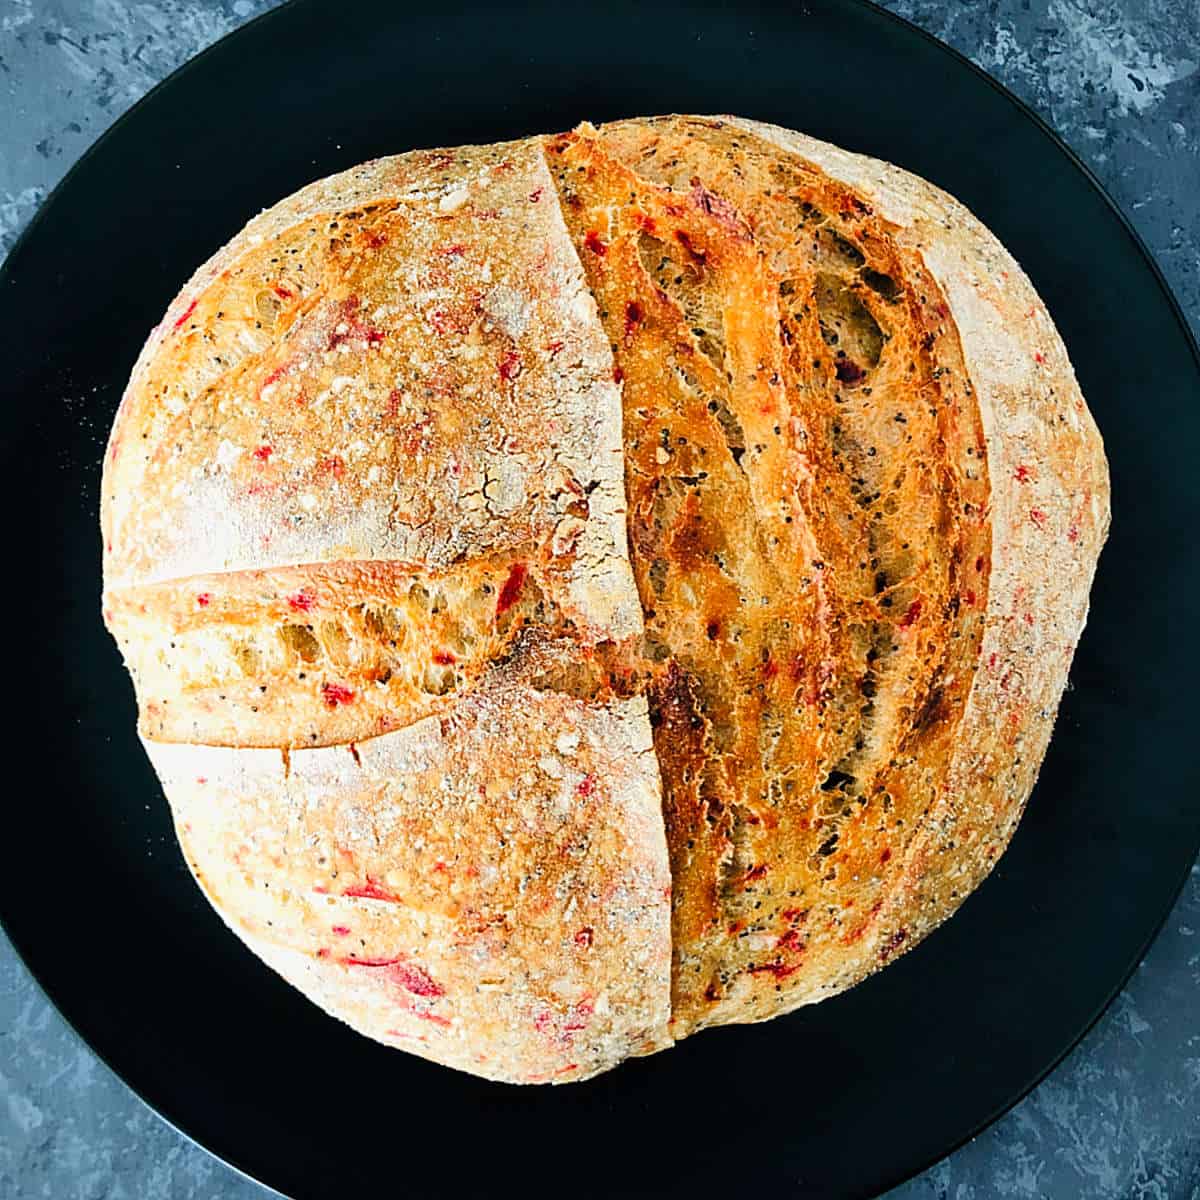 Beetroot sourdough boule to show the oven spring.